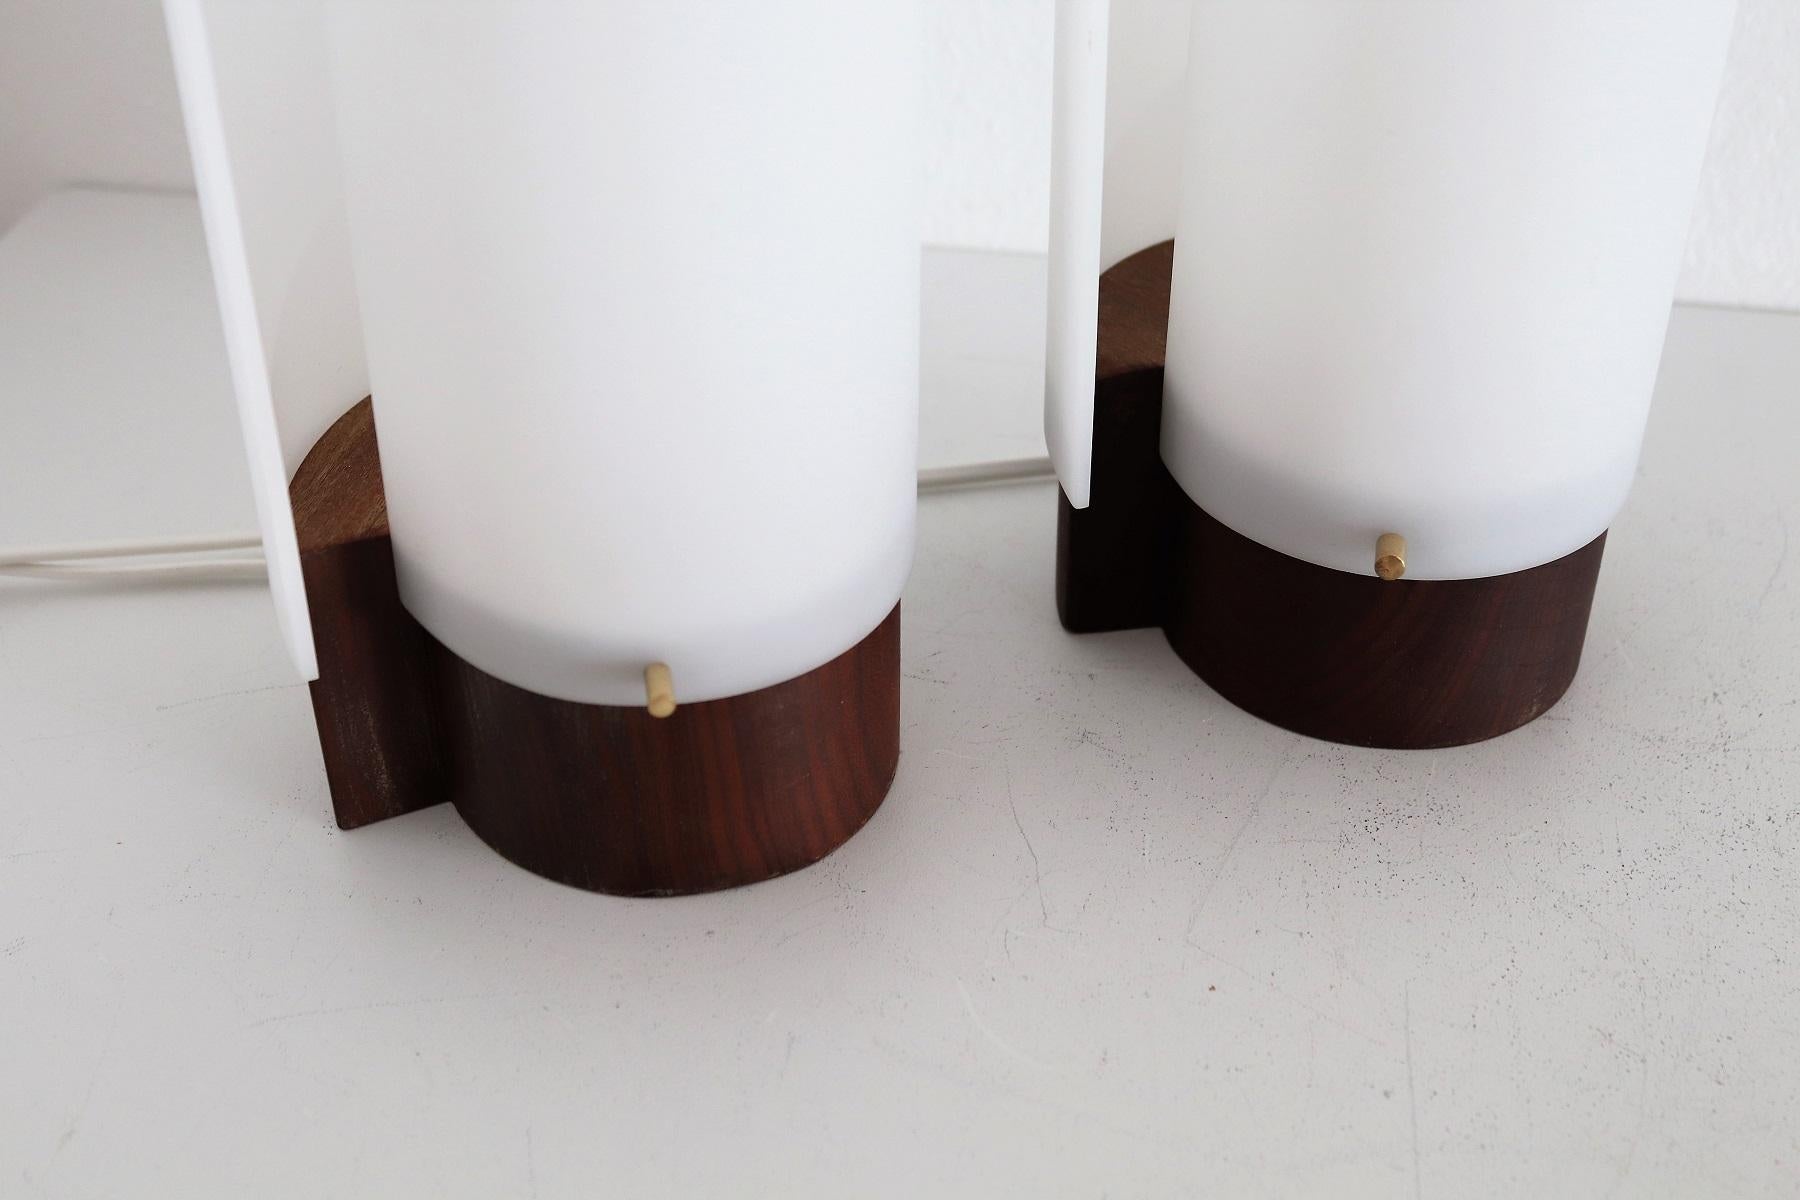 Italian Modernist Teakwood Table Lamps with Methacrylic Curved Shades, 1950s For Sale 3